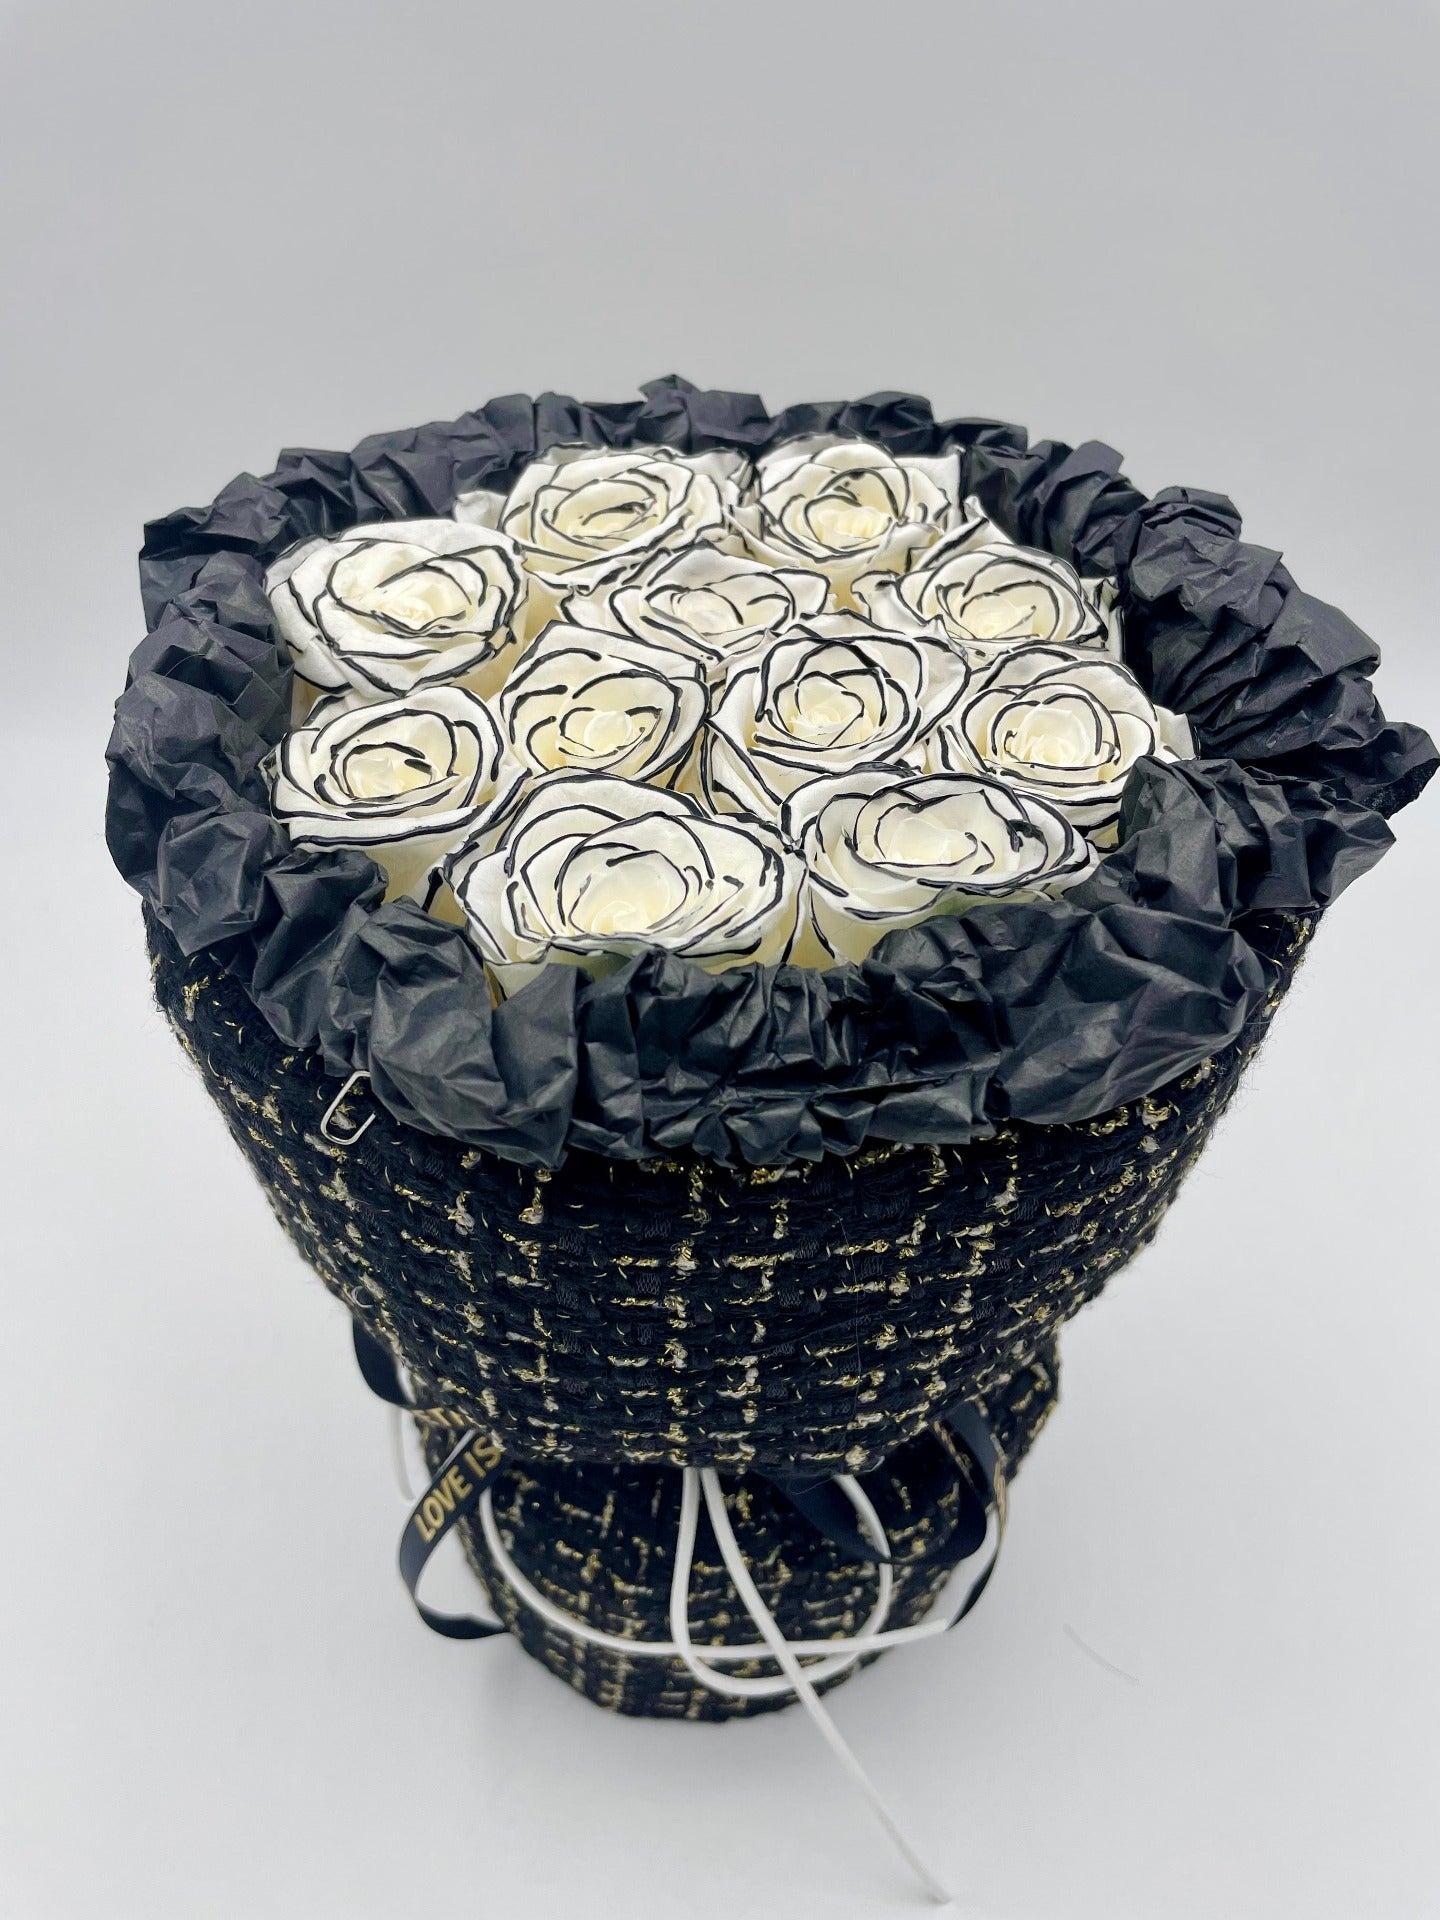 A bouquet of preserved white roses in a black box with white pattern of lines and dots. Available in Flowers Express Co in Melbourne.